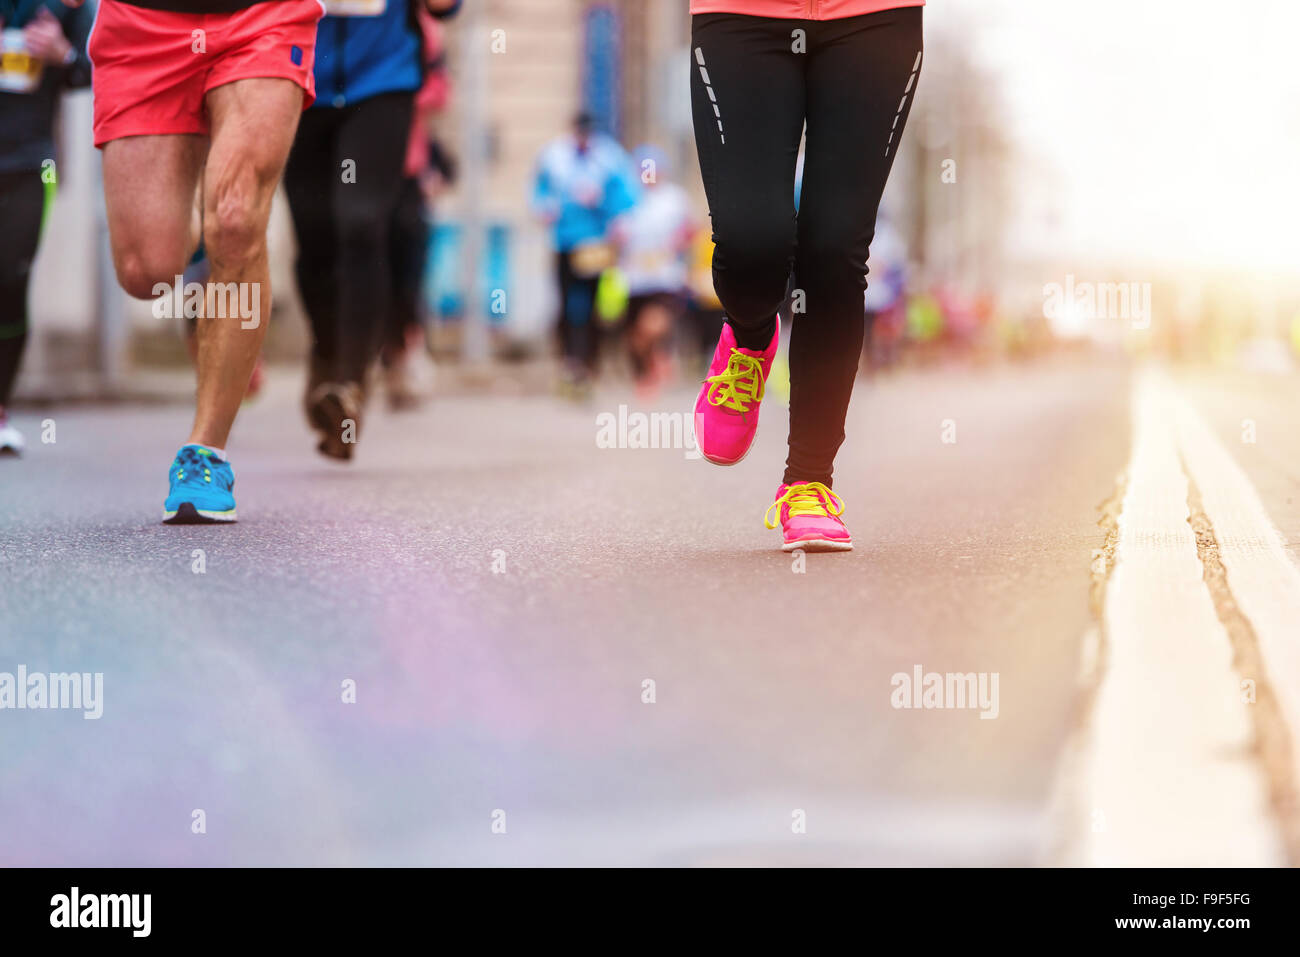 Legs of unrecognizable young woman running in a competition Stock Photo